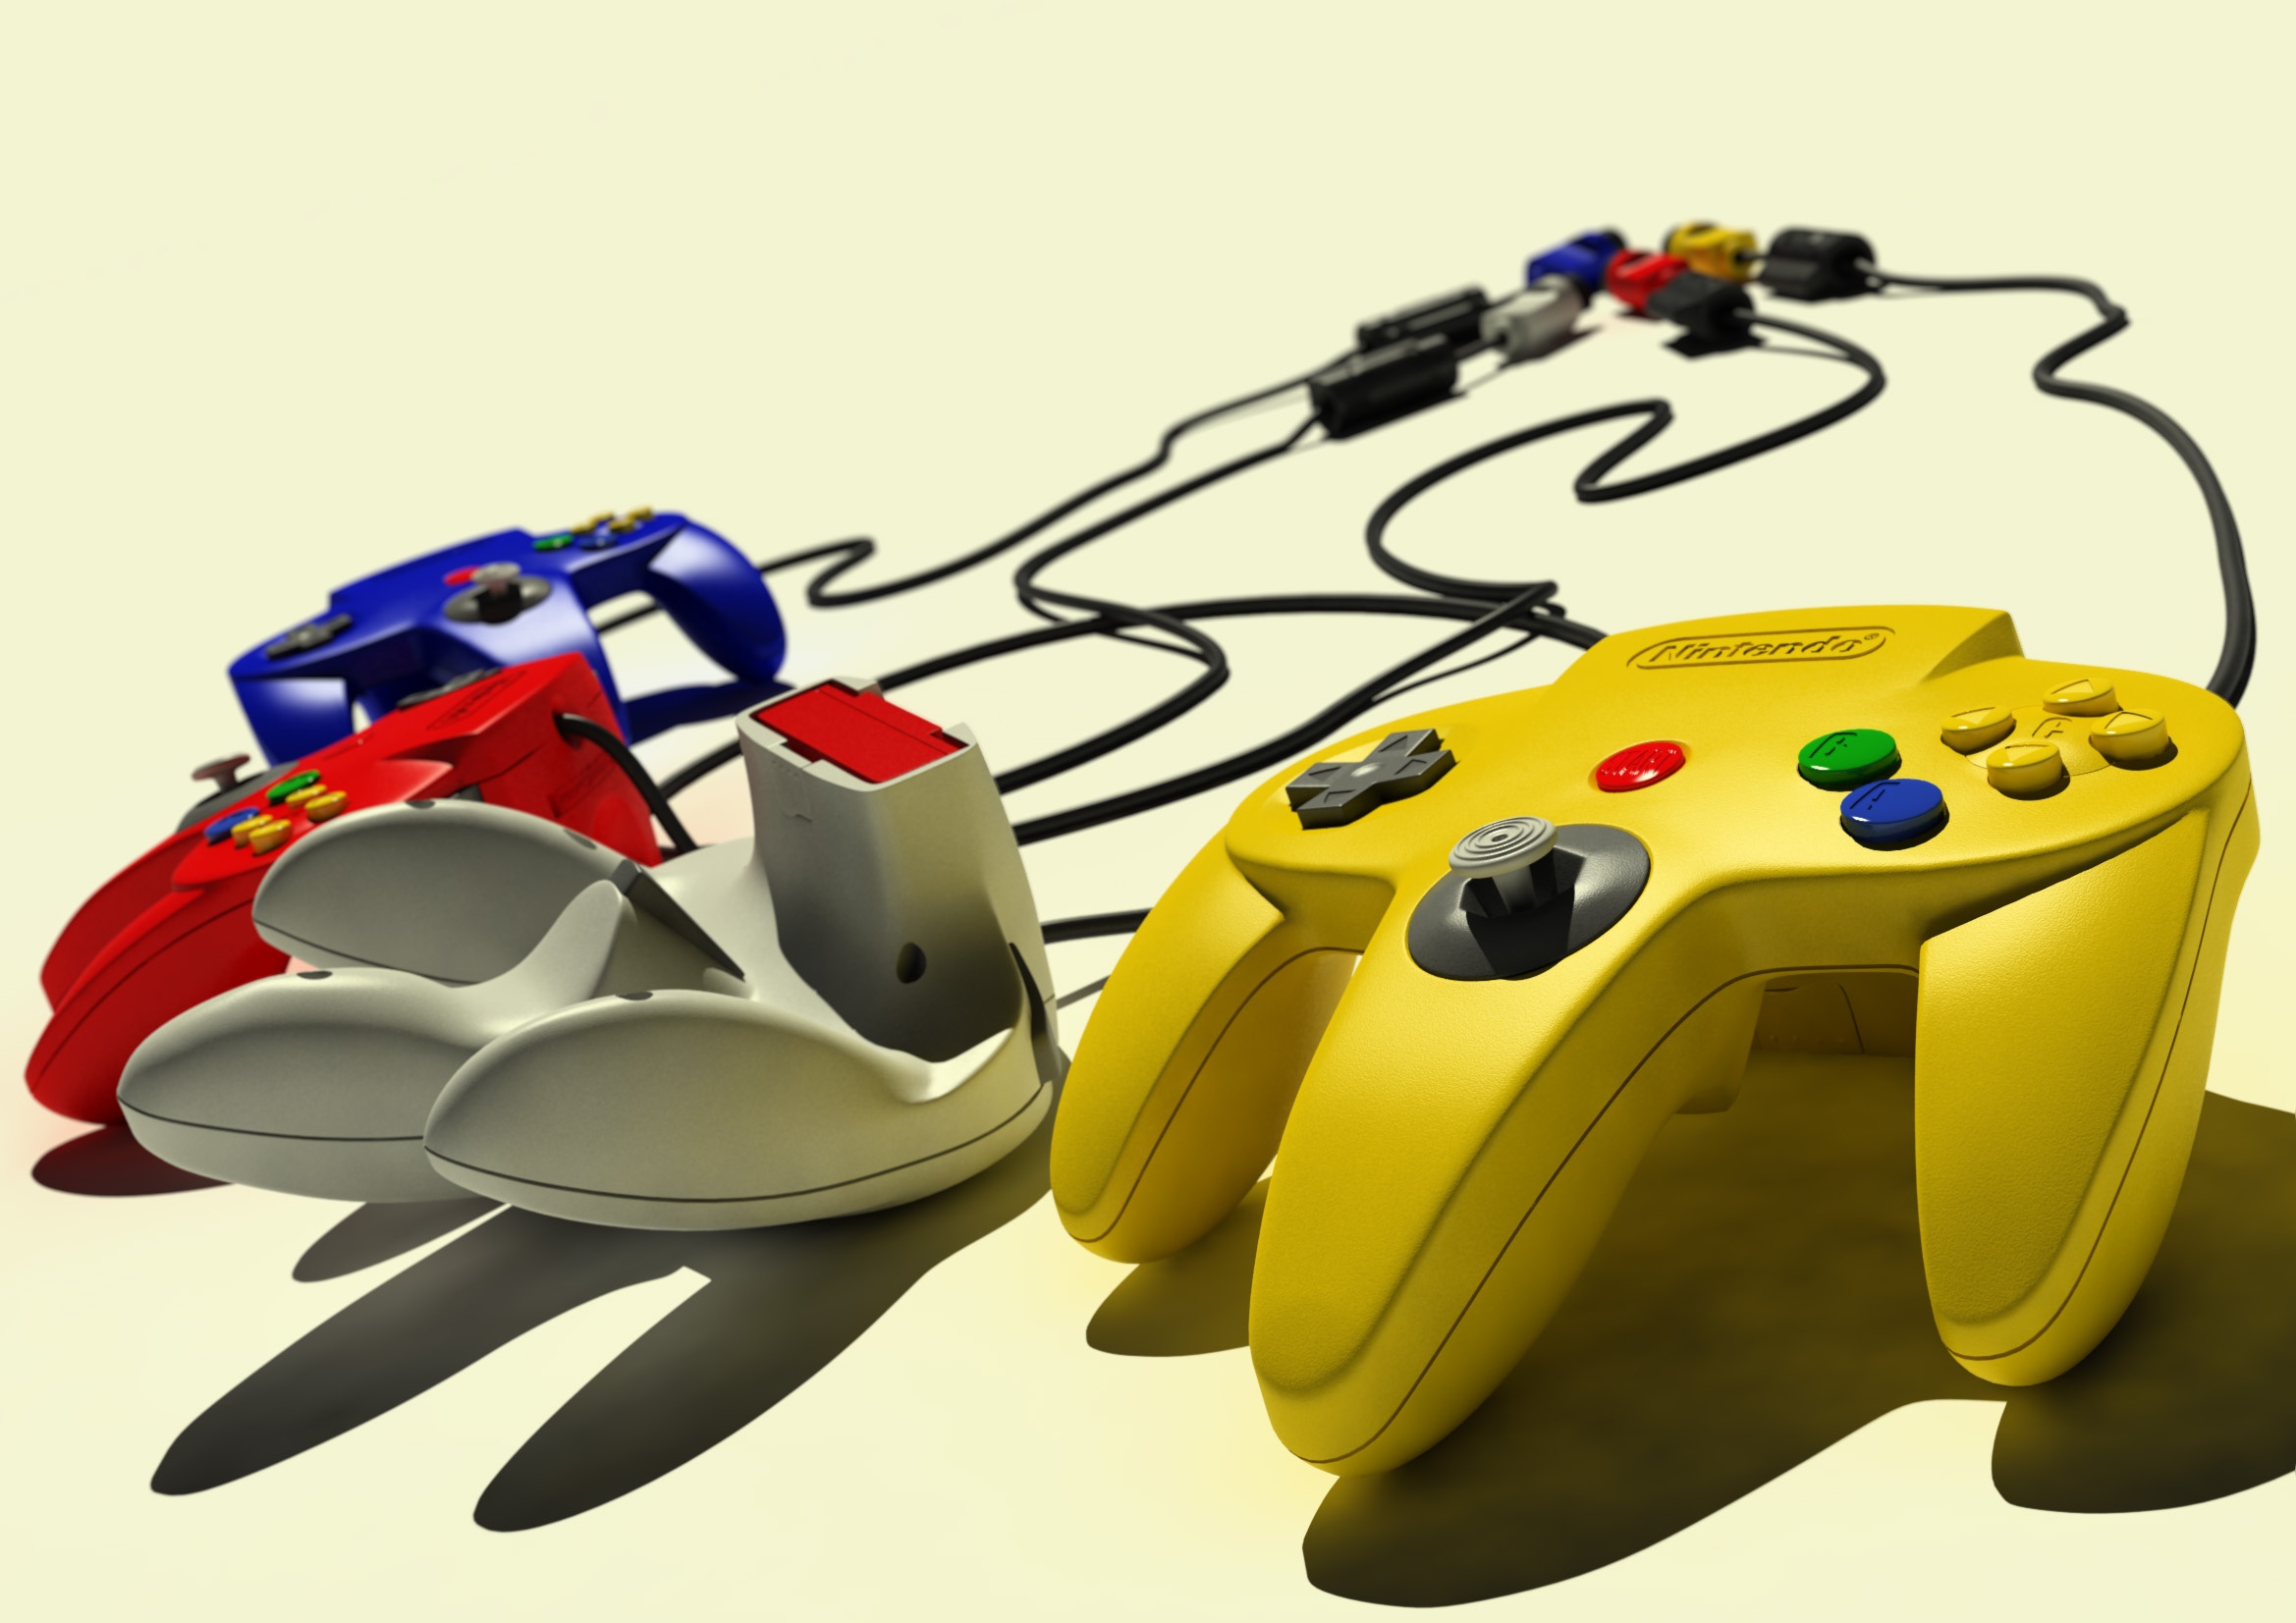 Nintendo: N64 controller, The fifth generation, Features ten buttons and analog control stick. 2340x1660 HD Wallpaper.